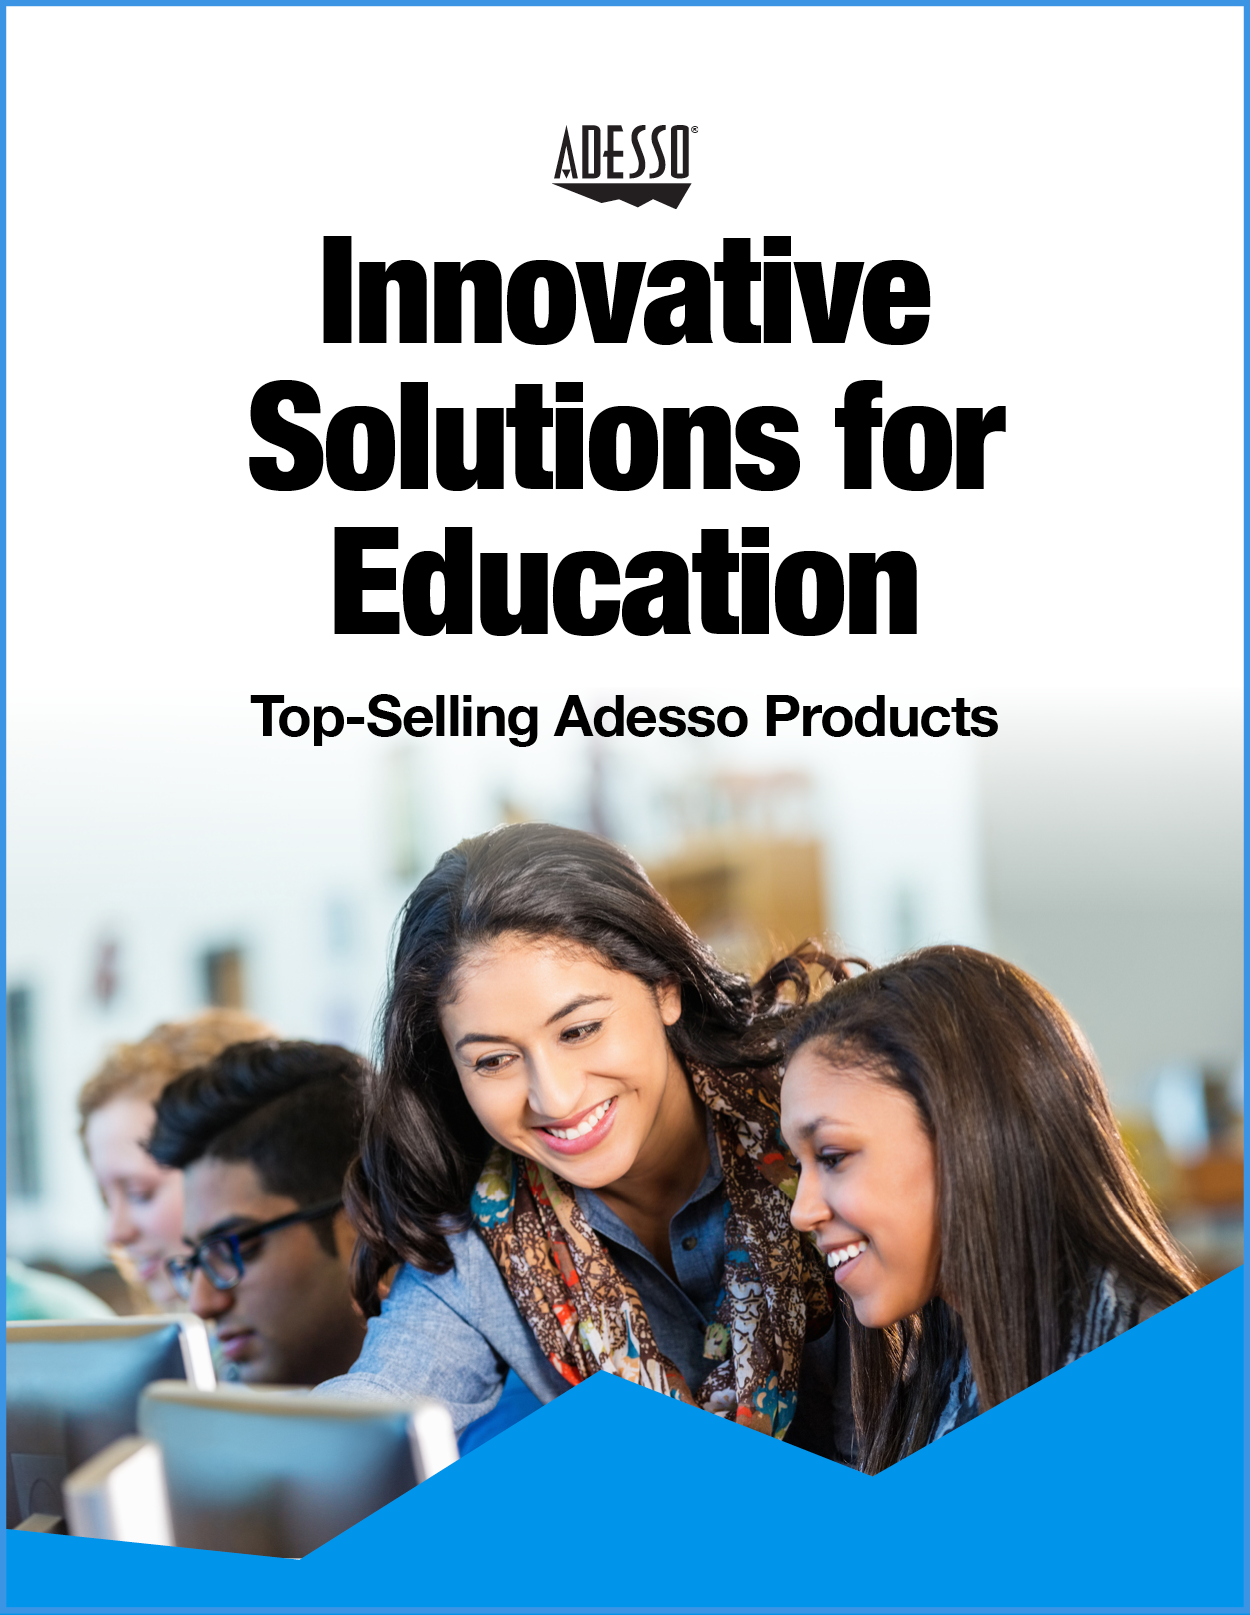 Adesso. Innovative solutions for education. Top-selling adesso products.